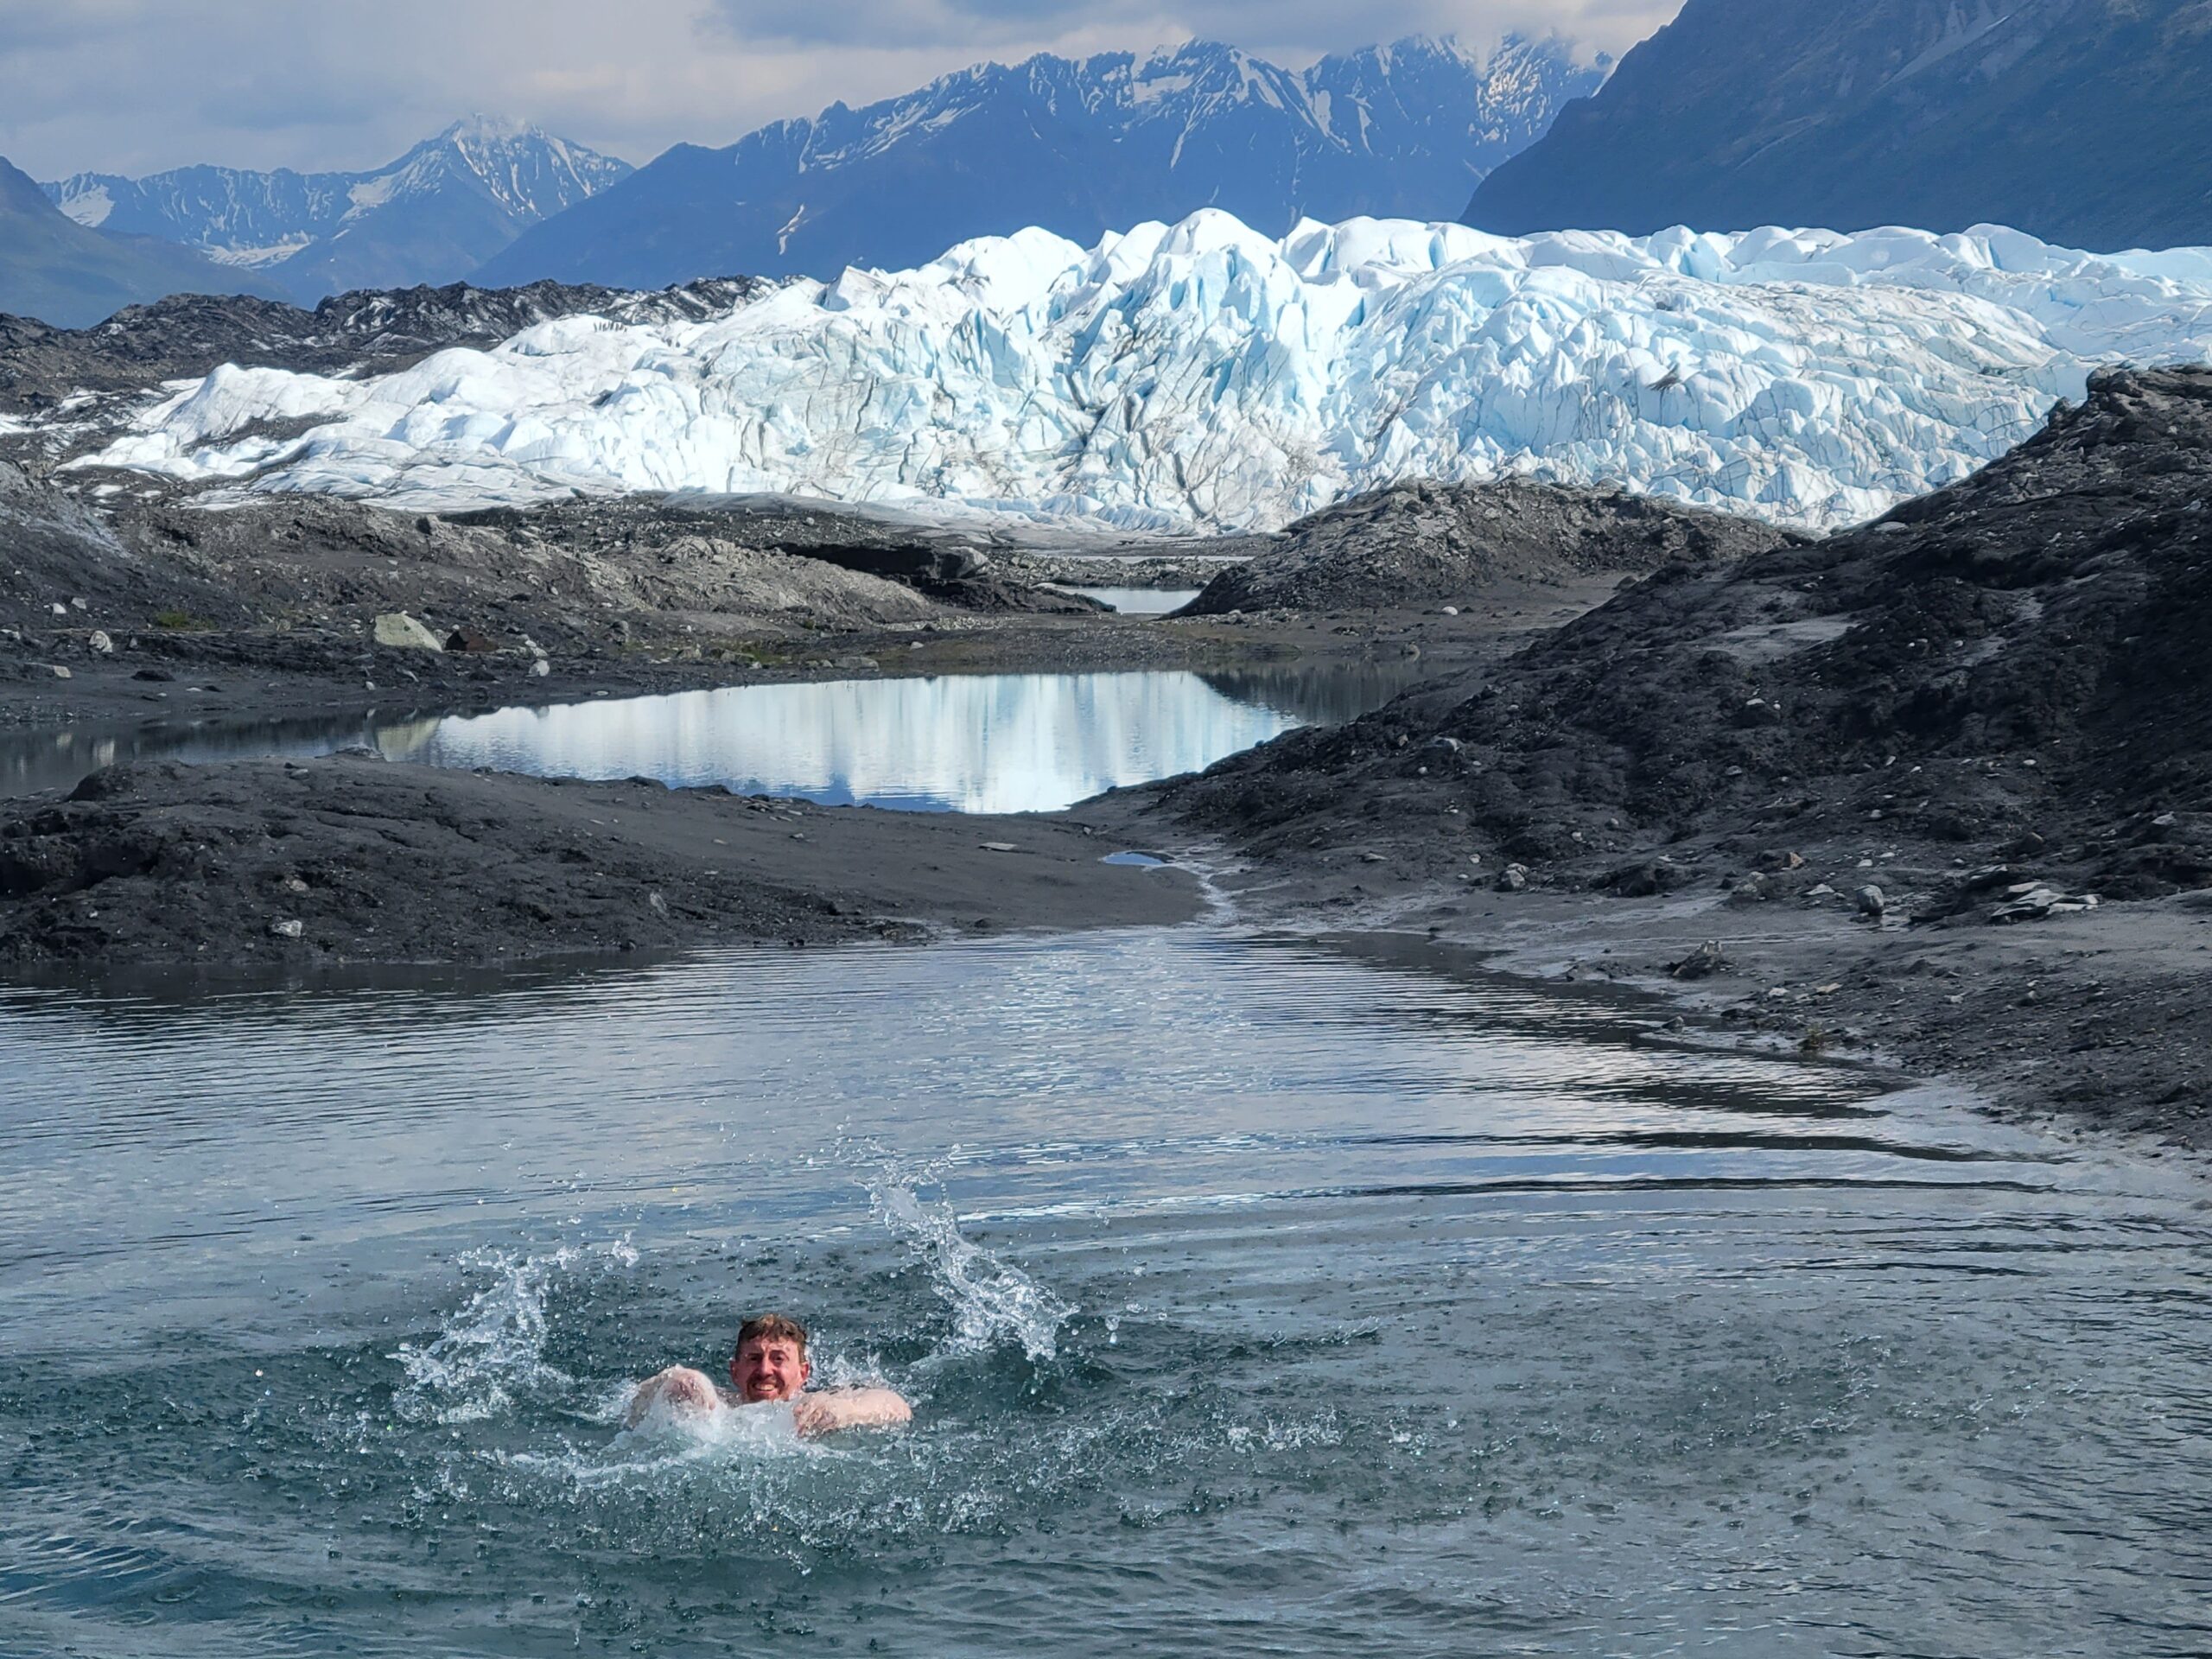 https://exposurealaska.com/wp-content/uploads/2022/04/swimming-in-kettle-pond-icefall-background-scaled.jpg